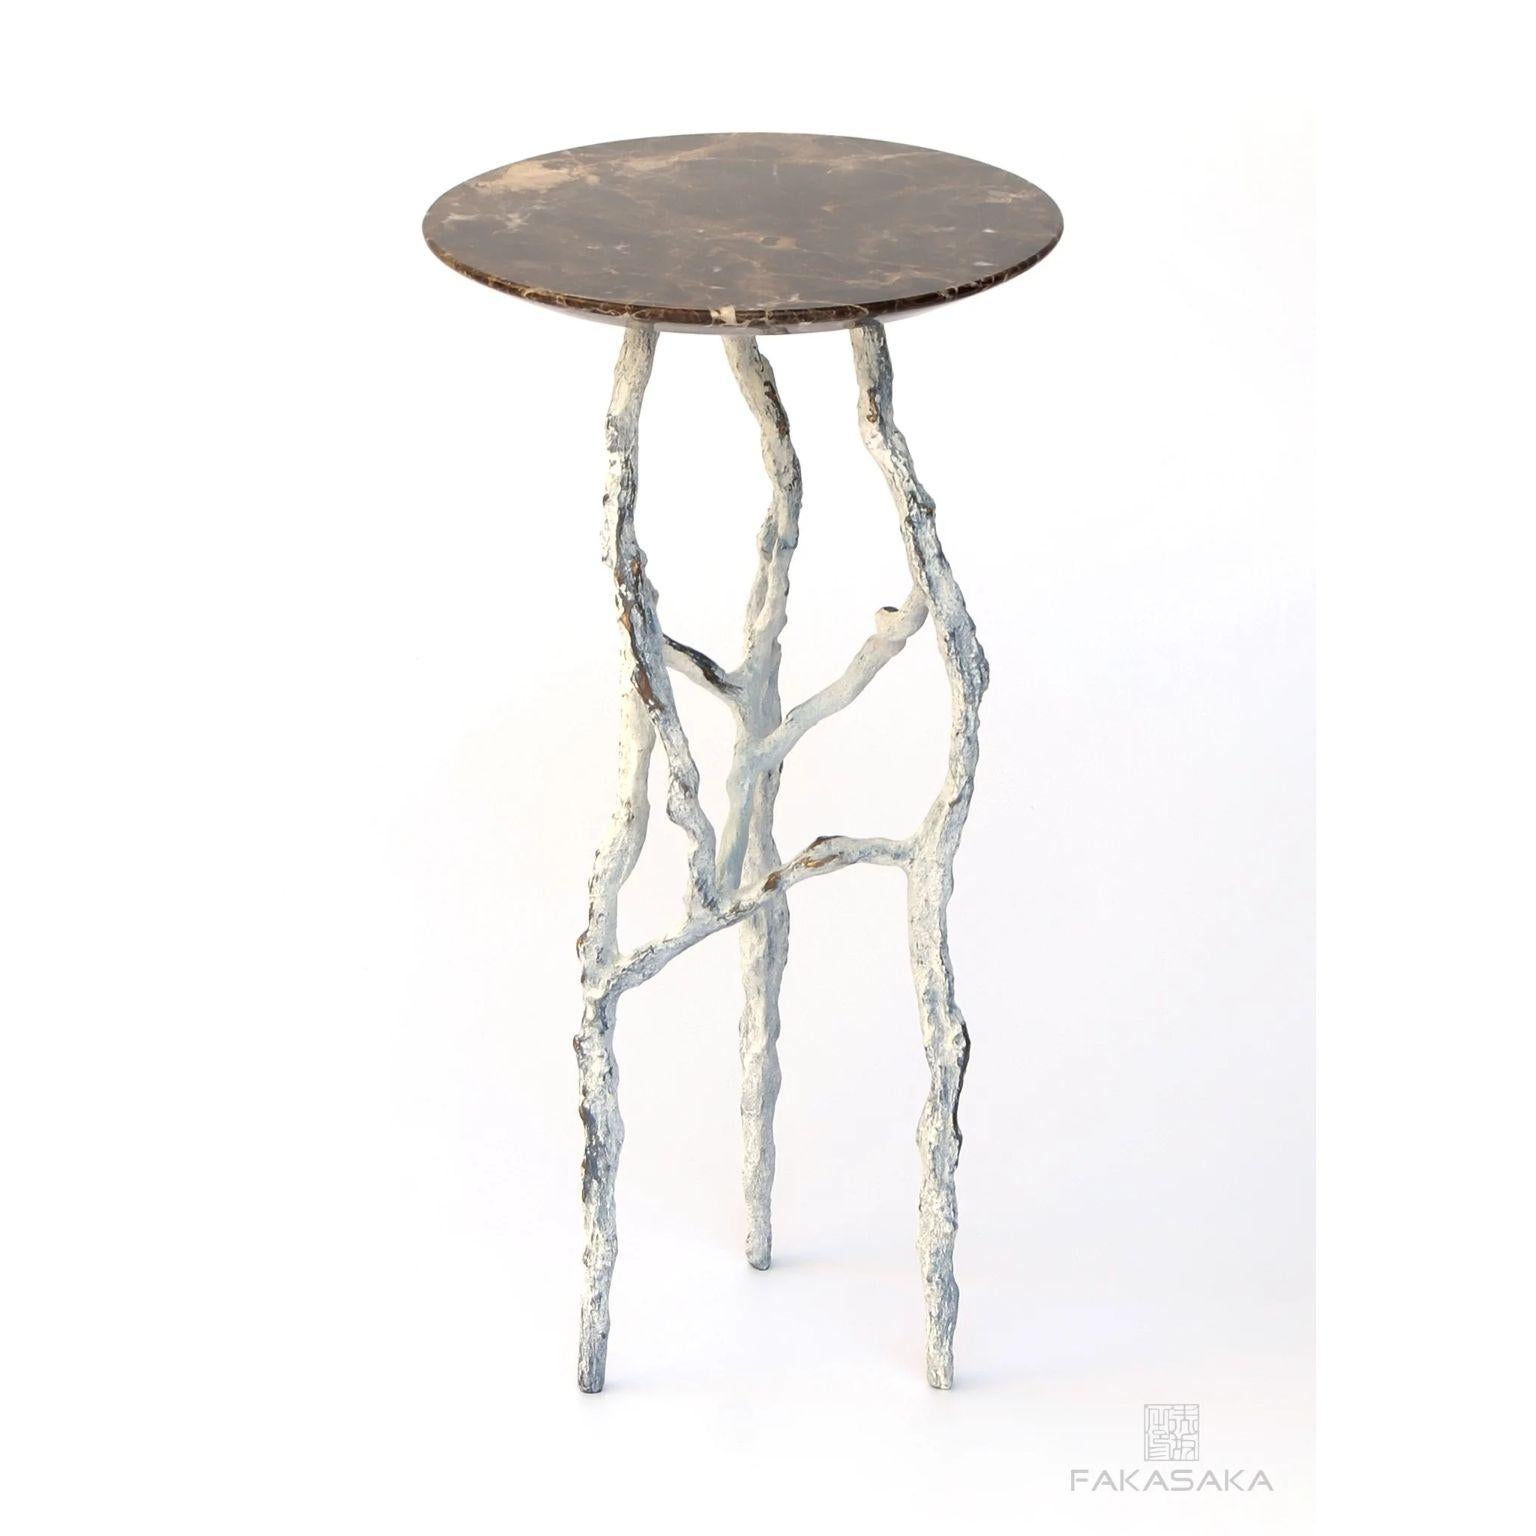 Alexia 3 drink table with Marrom Imperial Marble top by Fakasaka Design
Dimensions: W 30 cm, D 30 cm, H 60 cm.
Materials: off white bronze base, Marrom Imperial marble top.
 
Also available in different table top materials:
Nero Marquina Marble